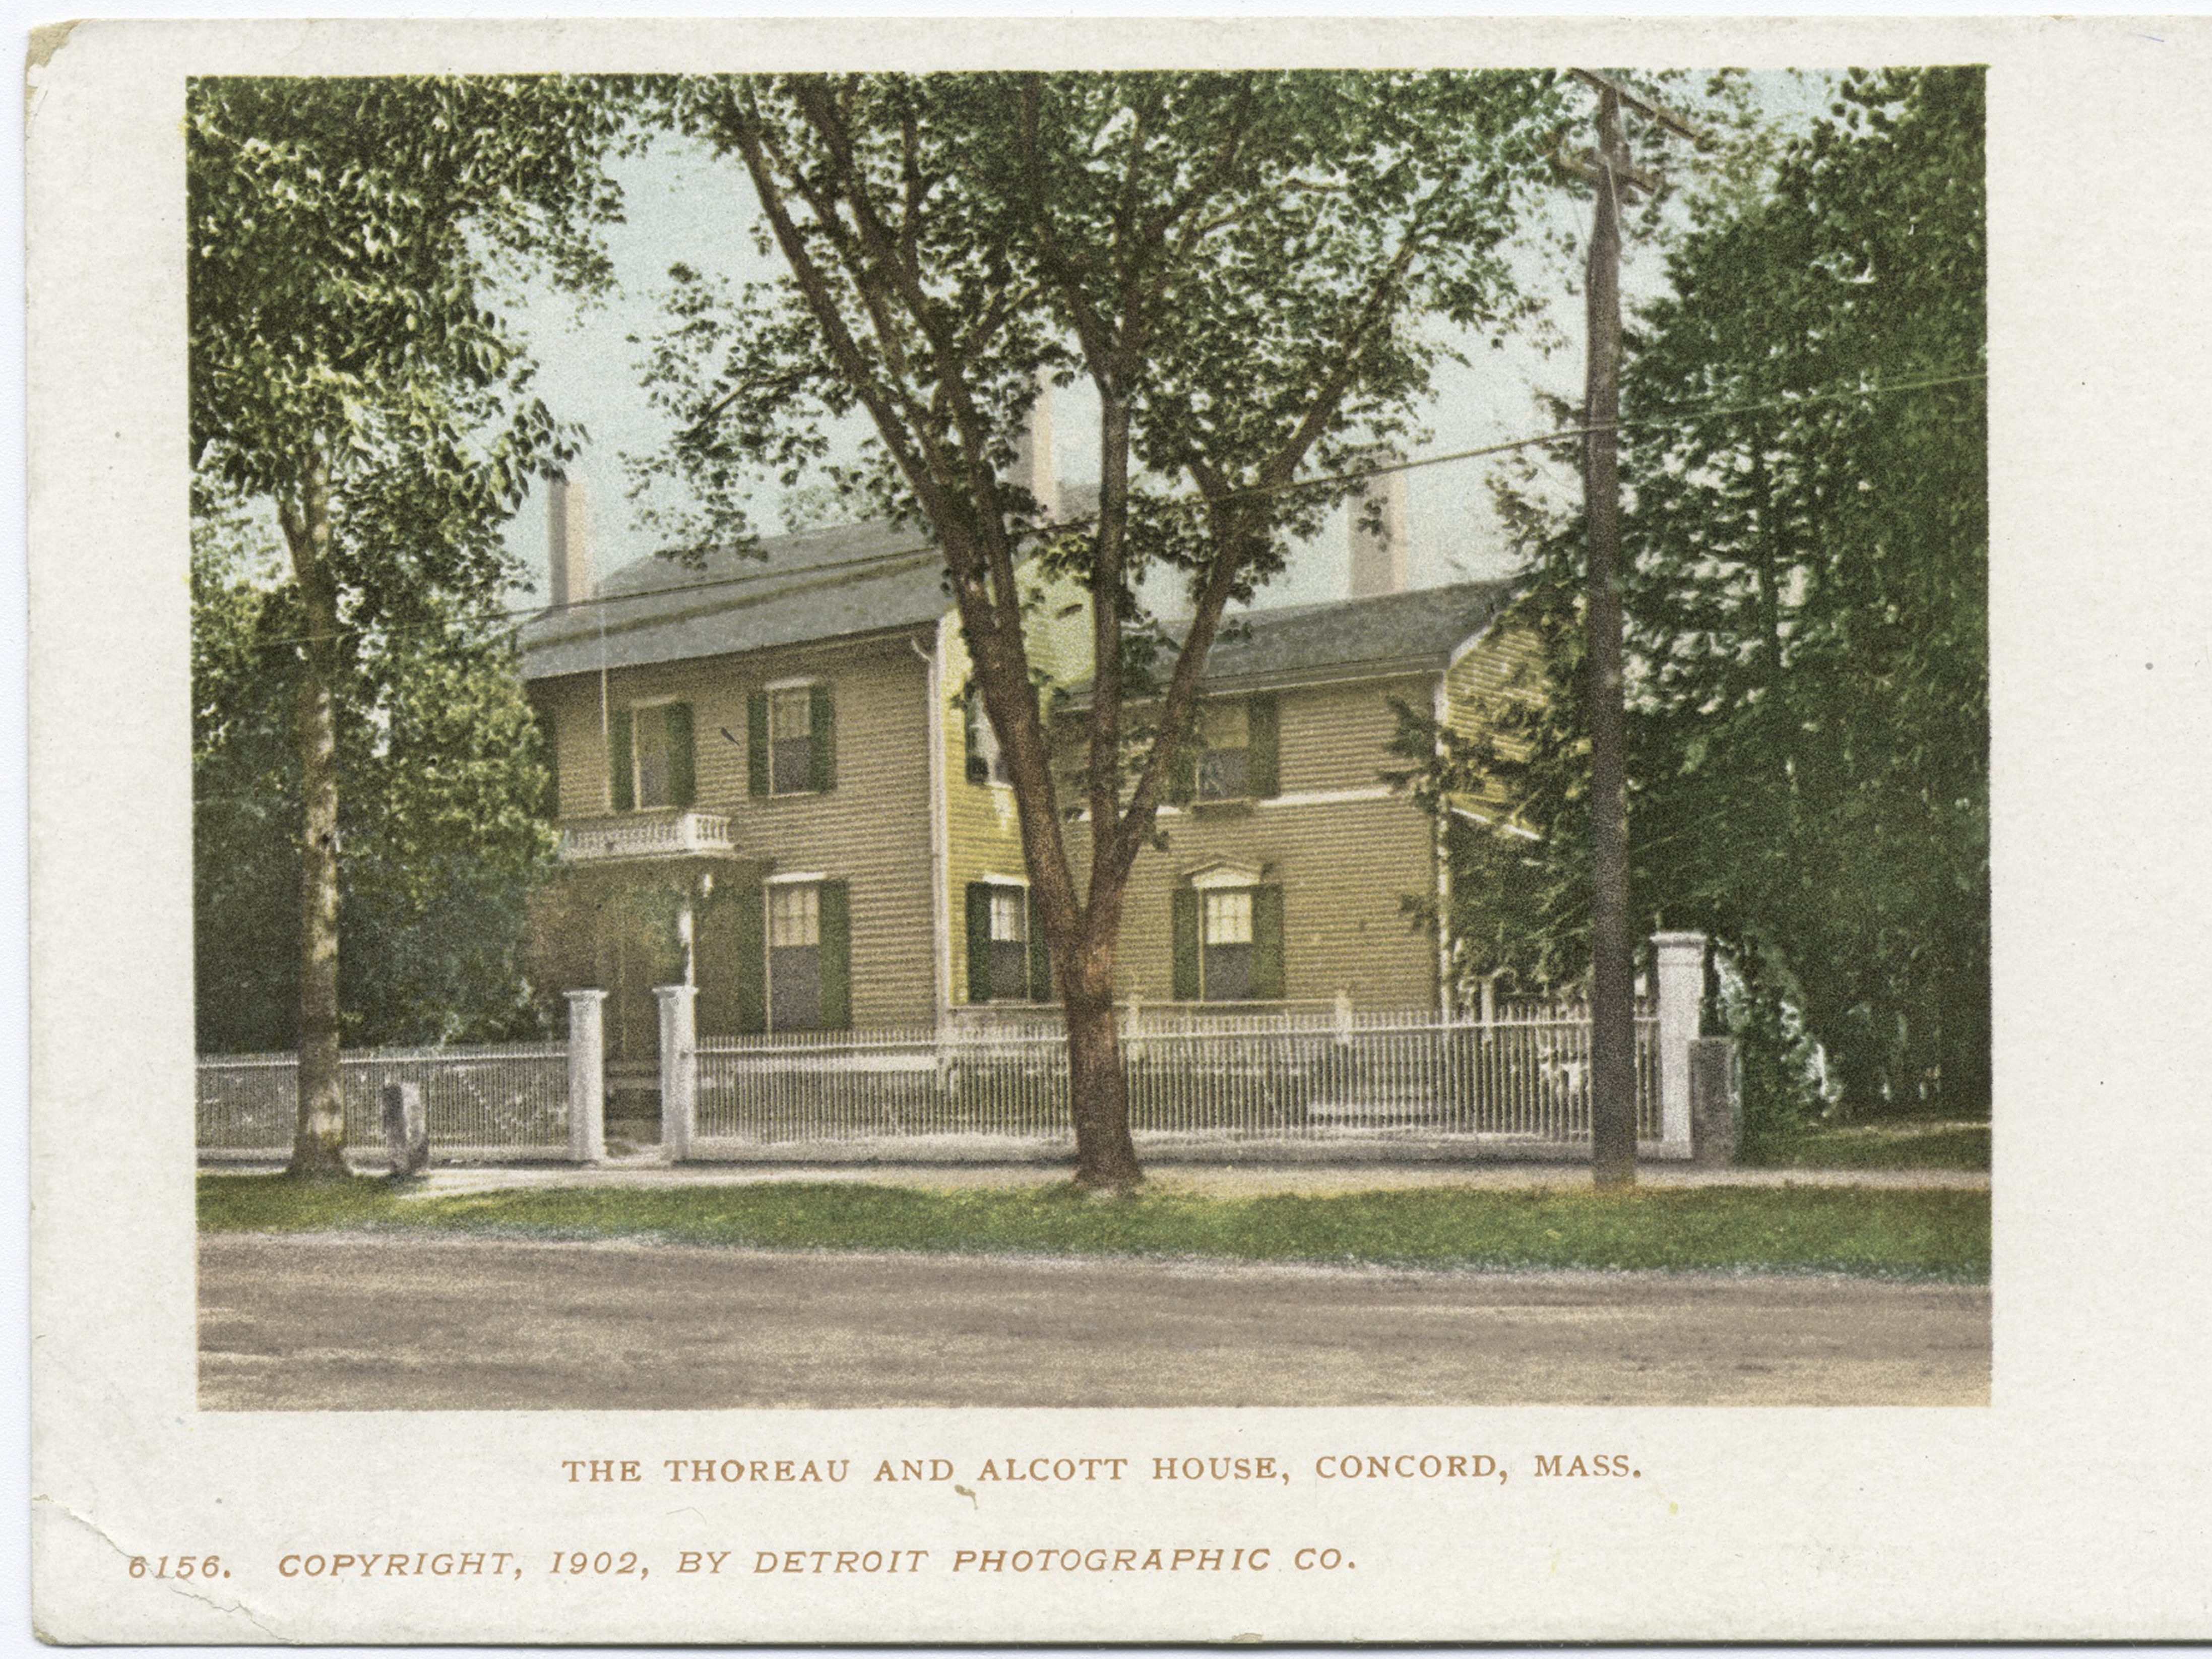 Detroit Publishing Company vintage postcard of the Thoreau and Alcott House, historic house in Concord, Massachusetts, 1902. From the New York Public Library. (Photo by Smith Collection/Gado/Getty Images)